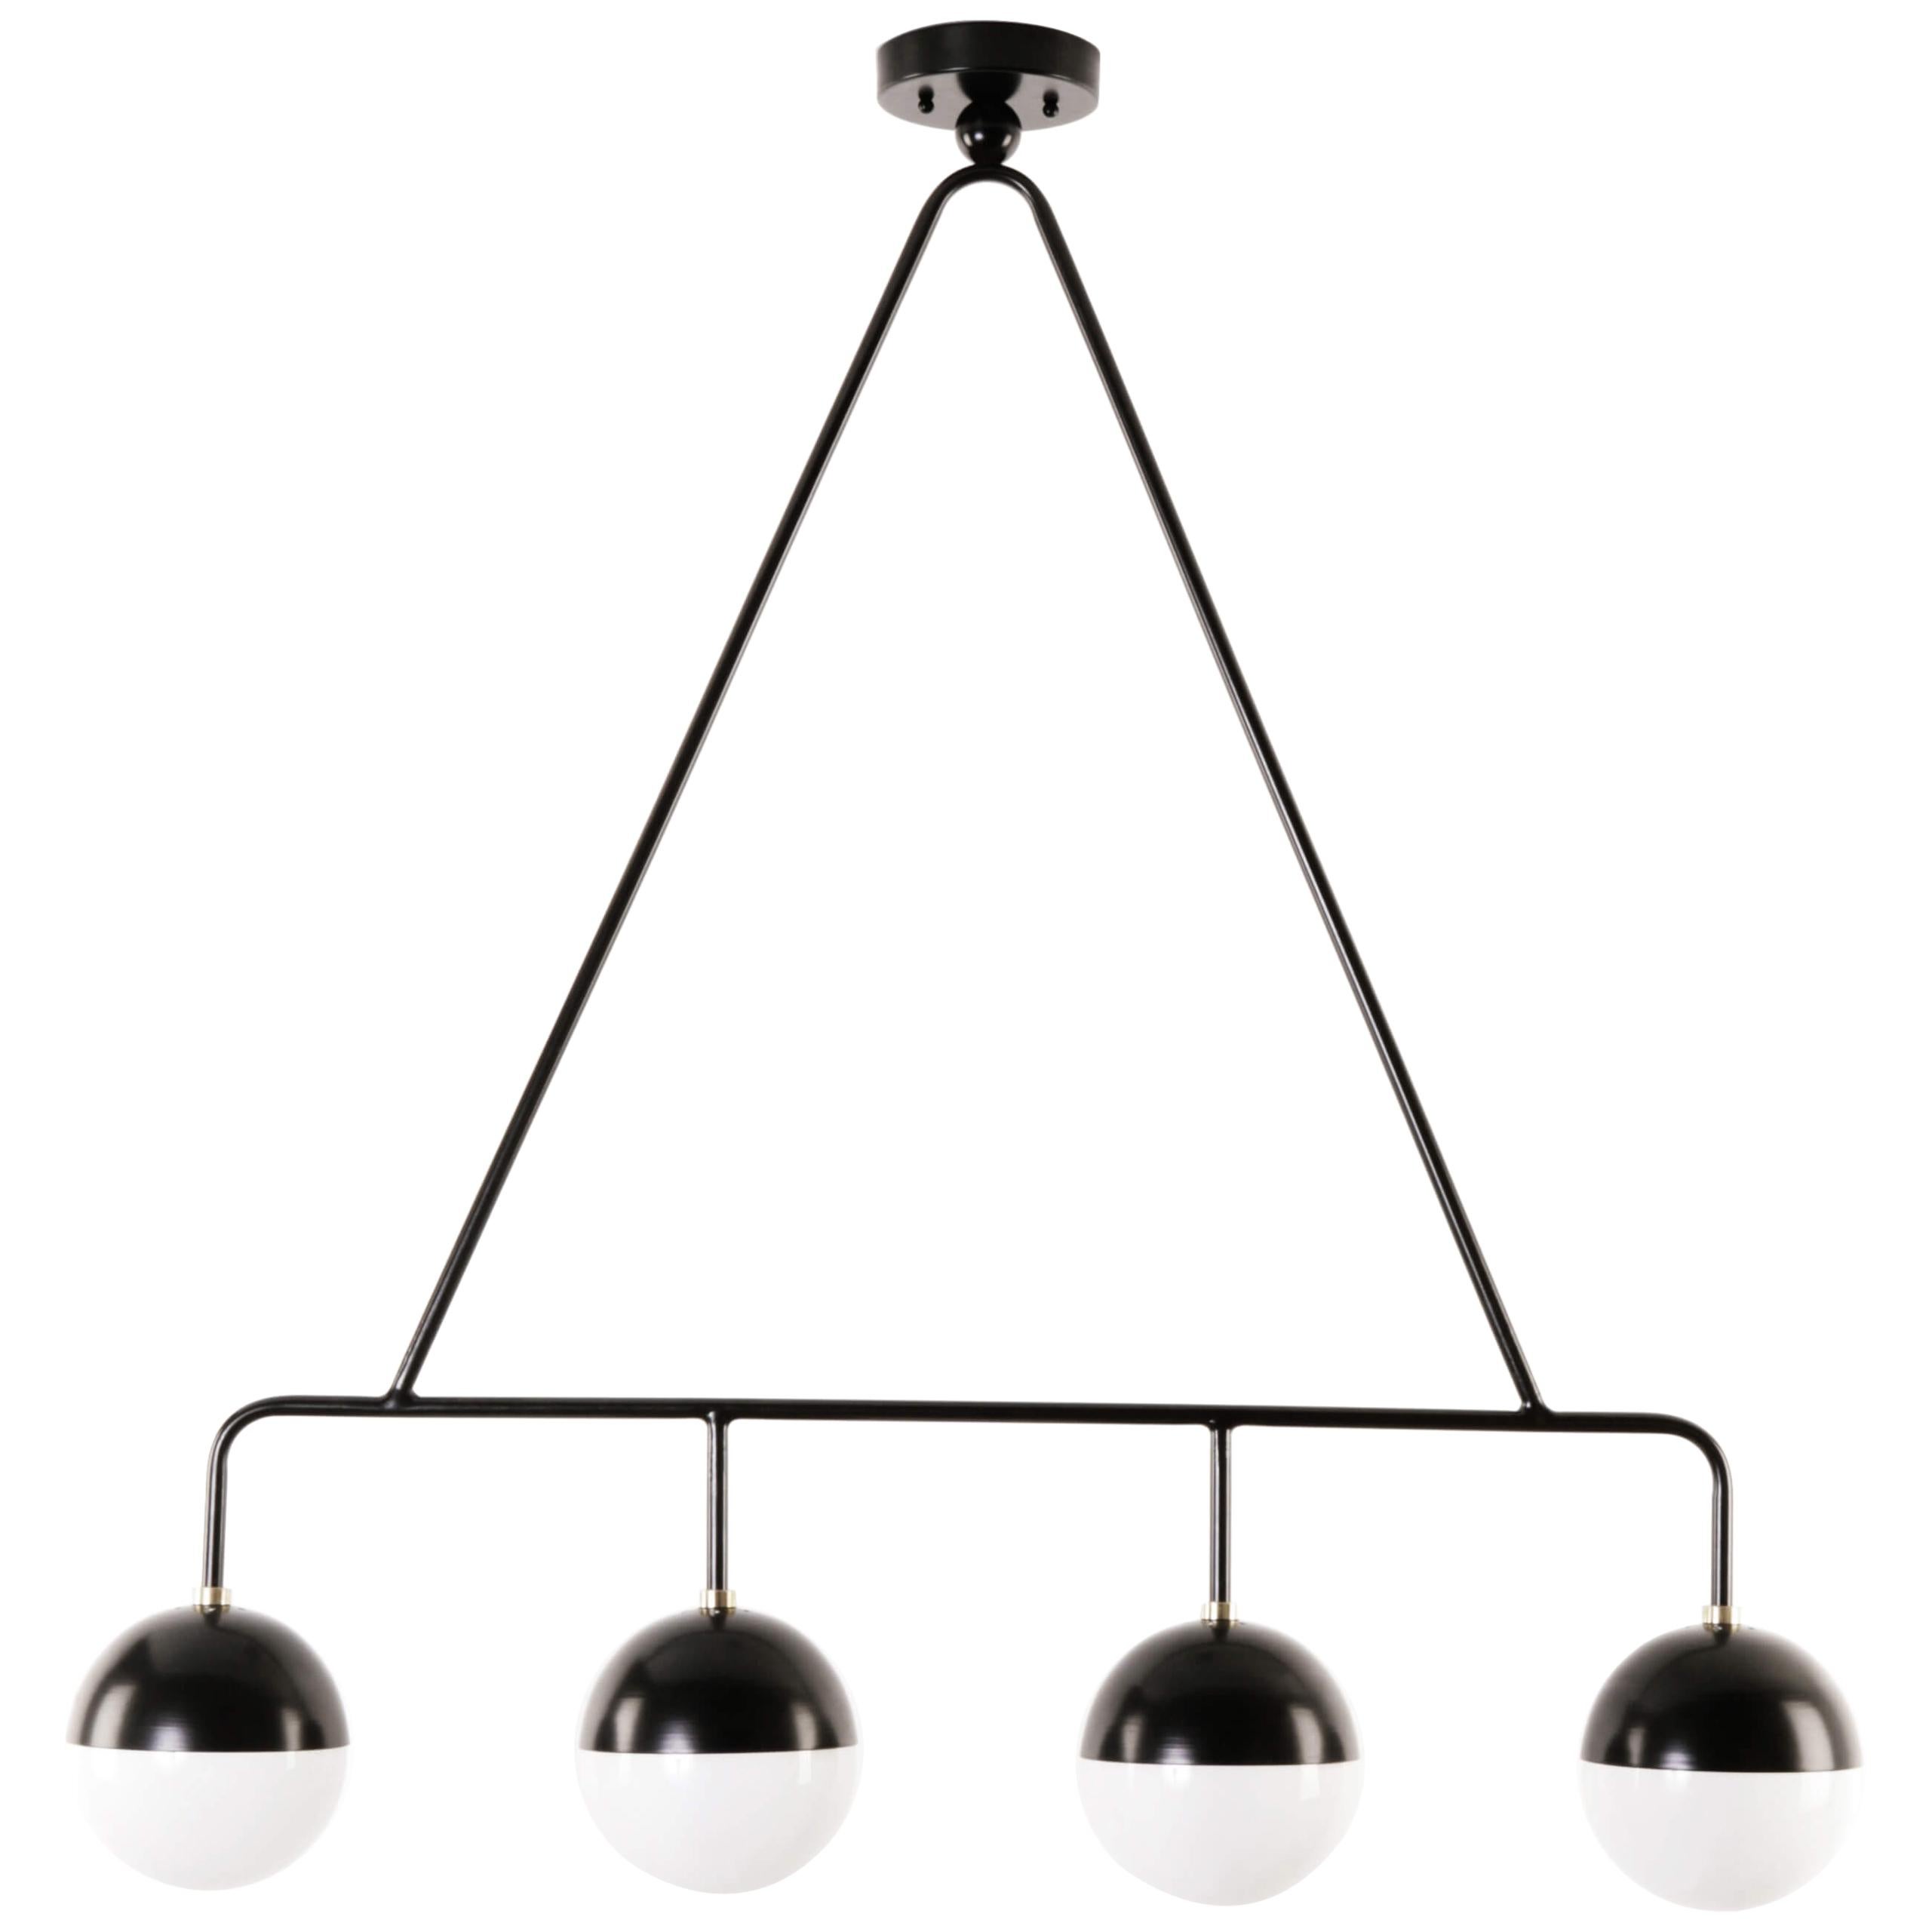 Balise Pendant in Black Powder-Coated Steel with 4 Opal Glass Globes